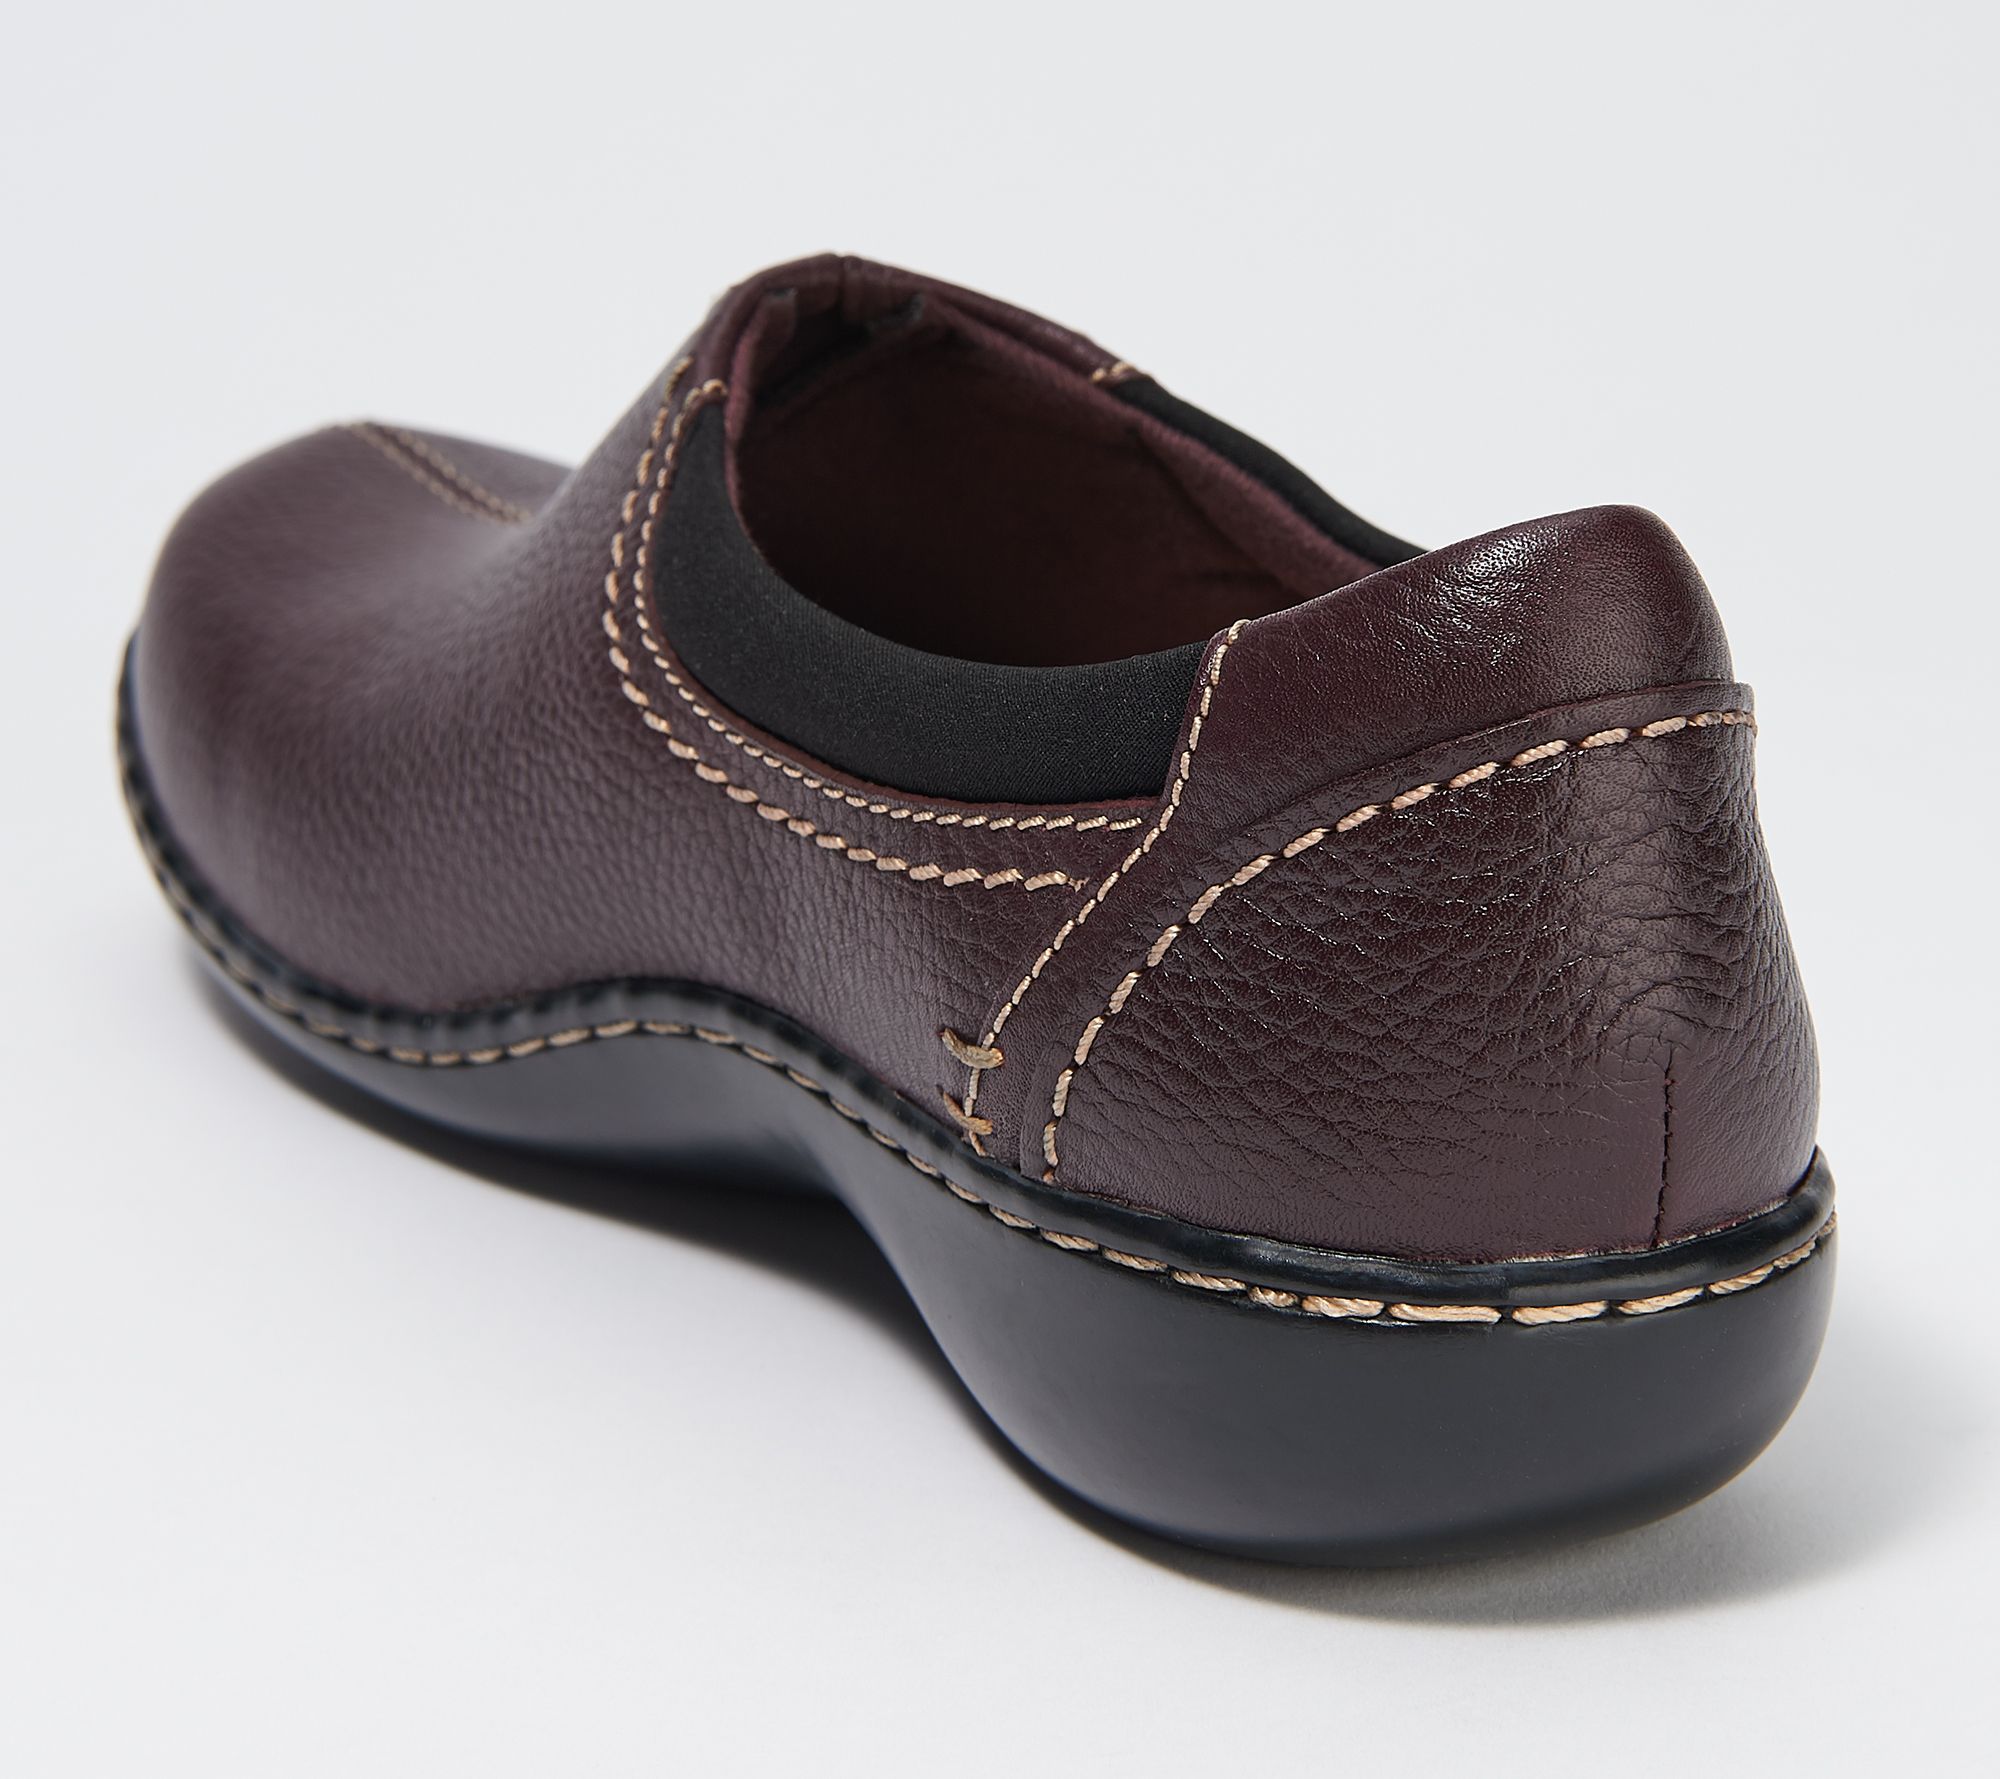 clarks leather lace up shoes ashland pearl